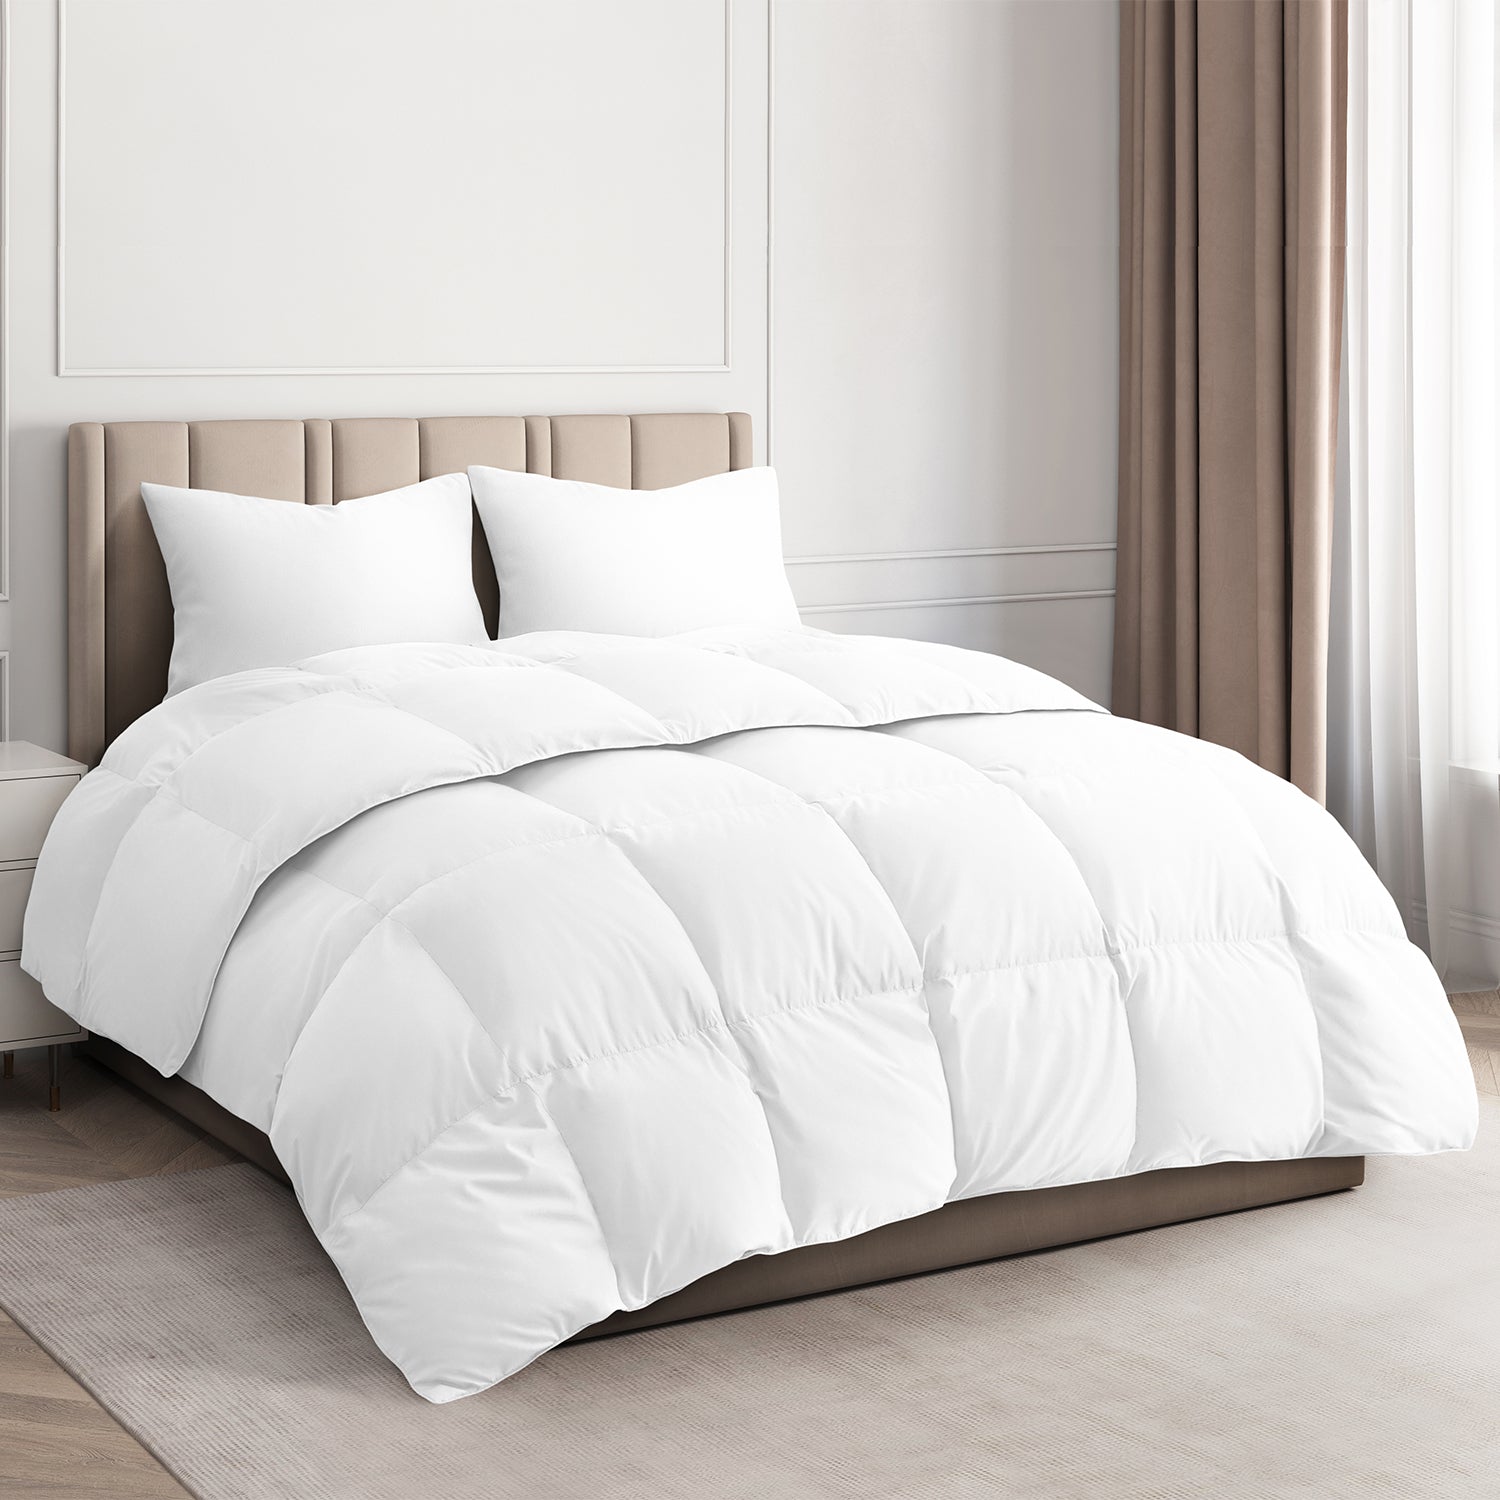 High Quality Comforter Sets For Beds Of All Sizes